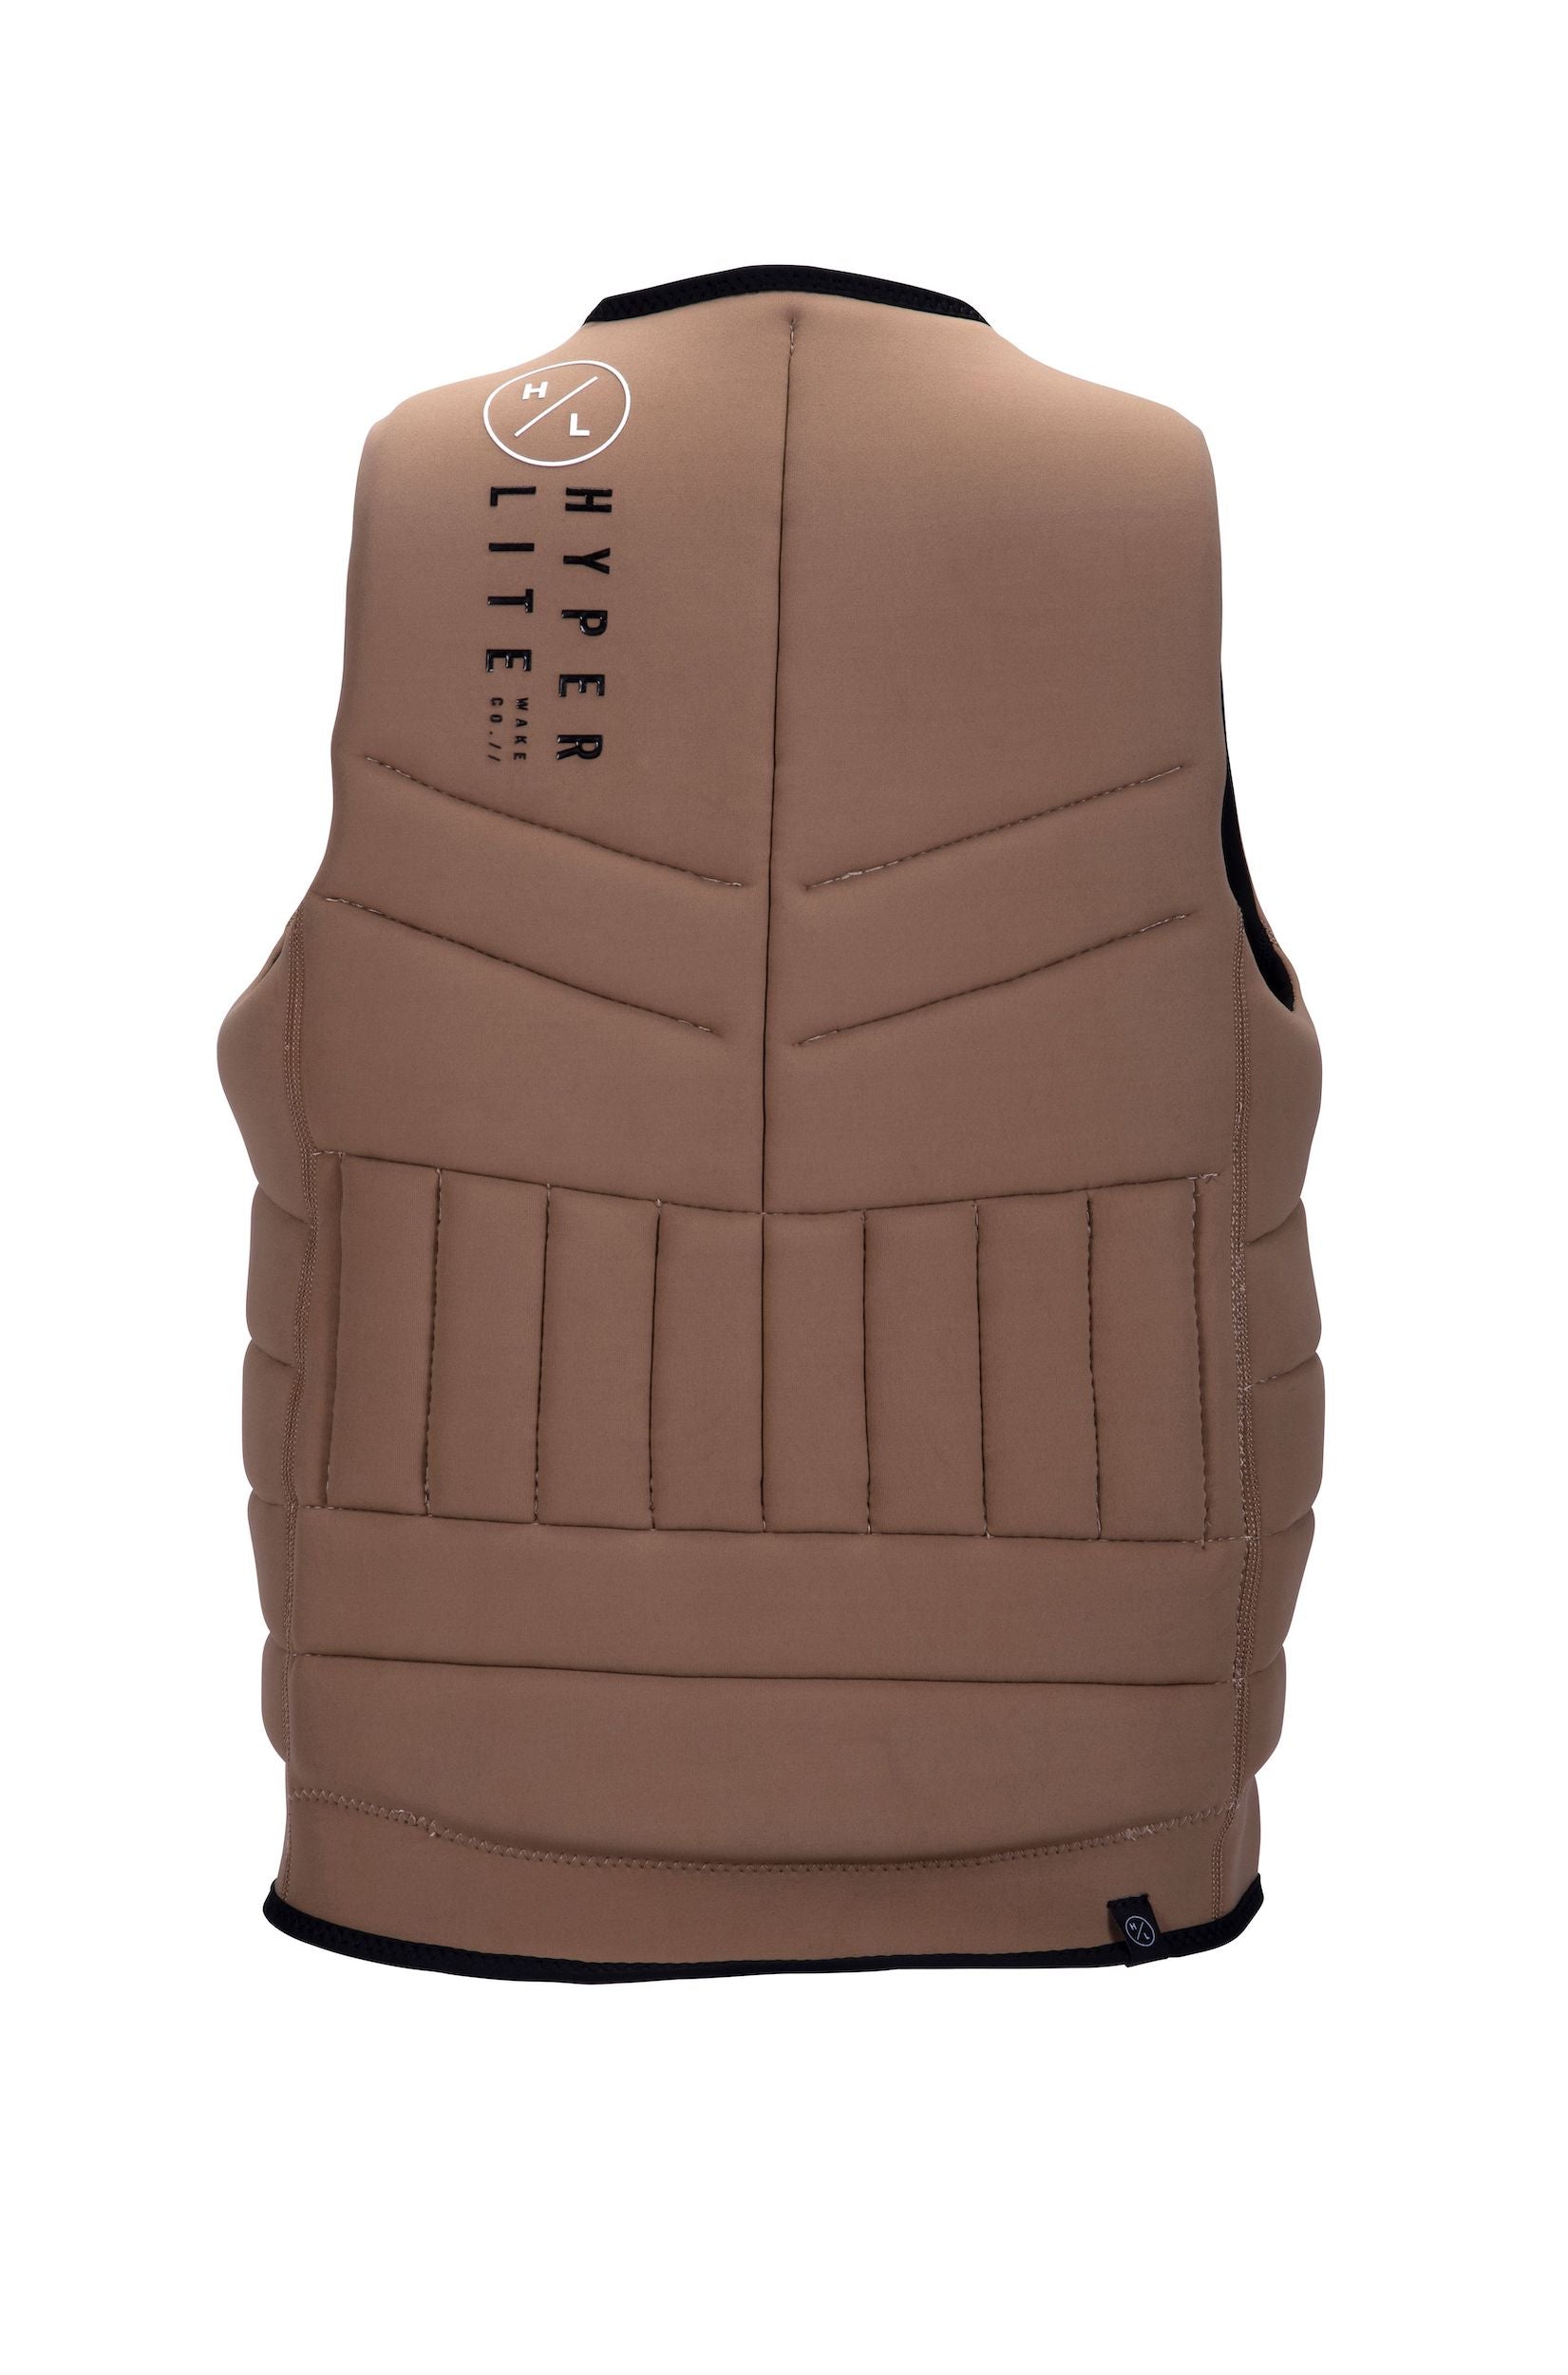 A Hyperlite Relapse Vest with a black logo on it featuring lightweight construction.